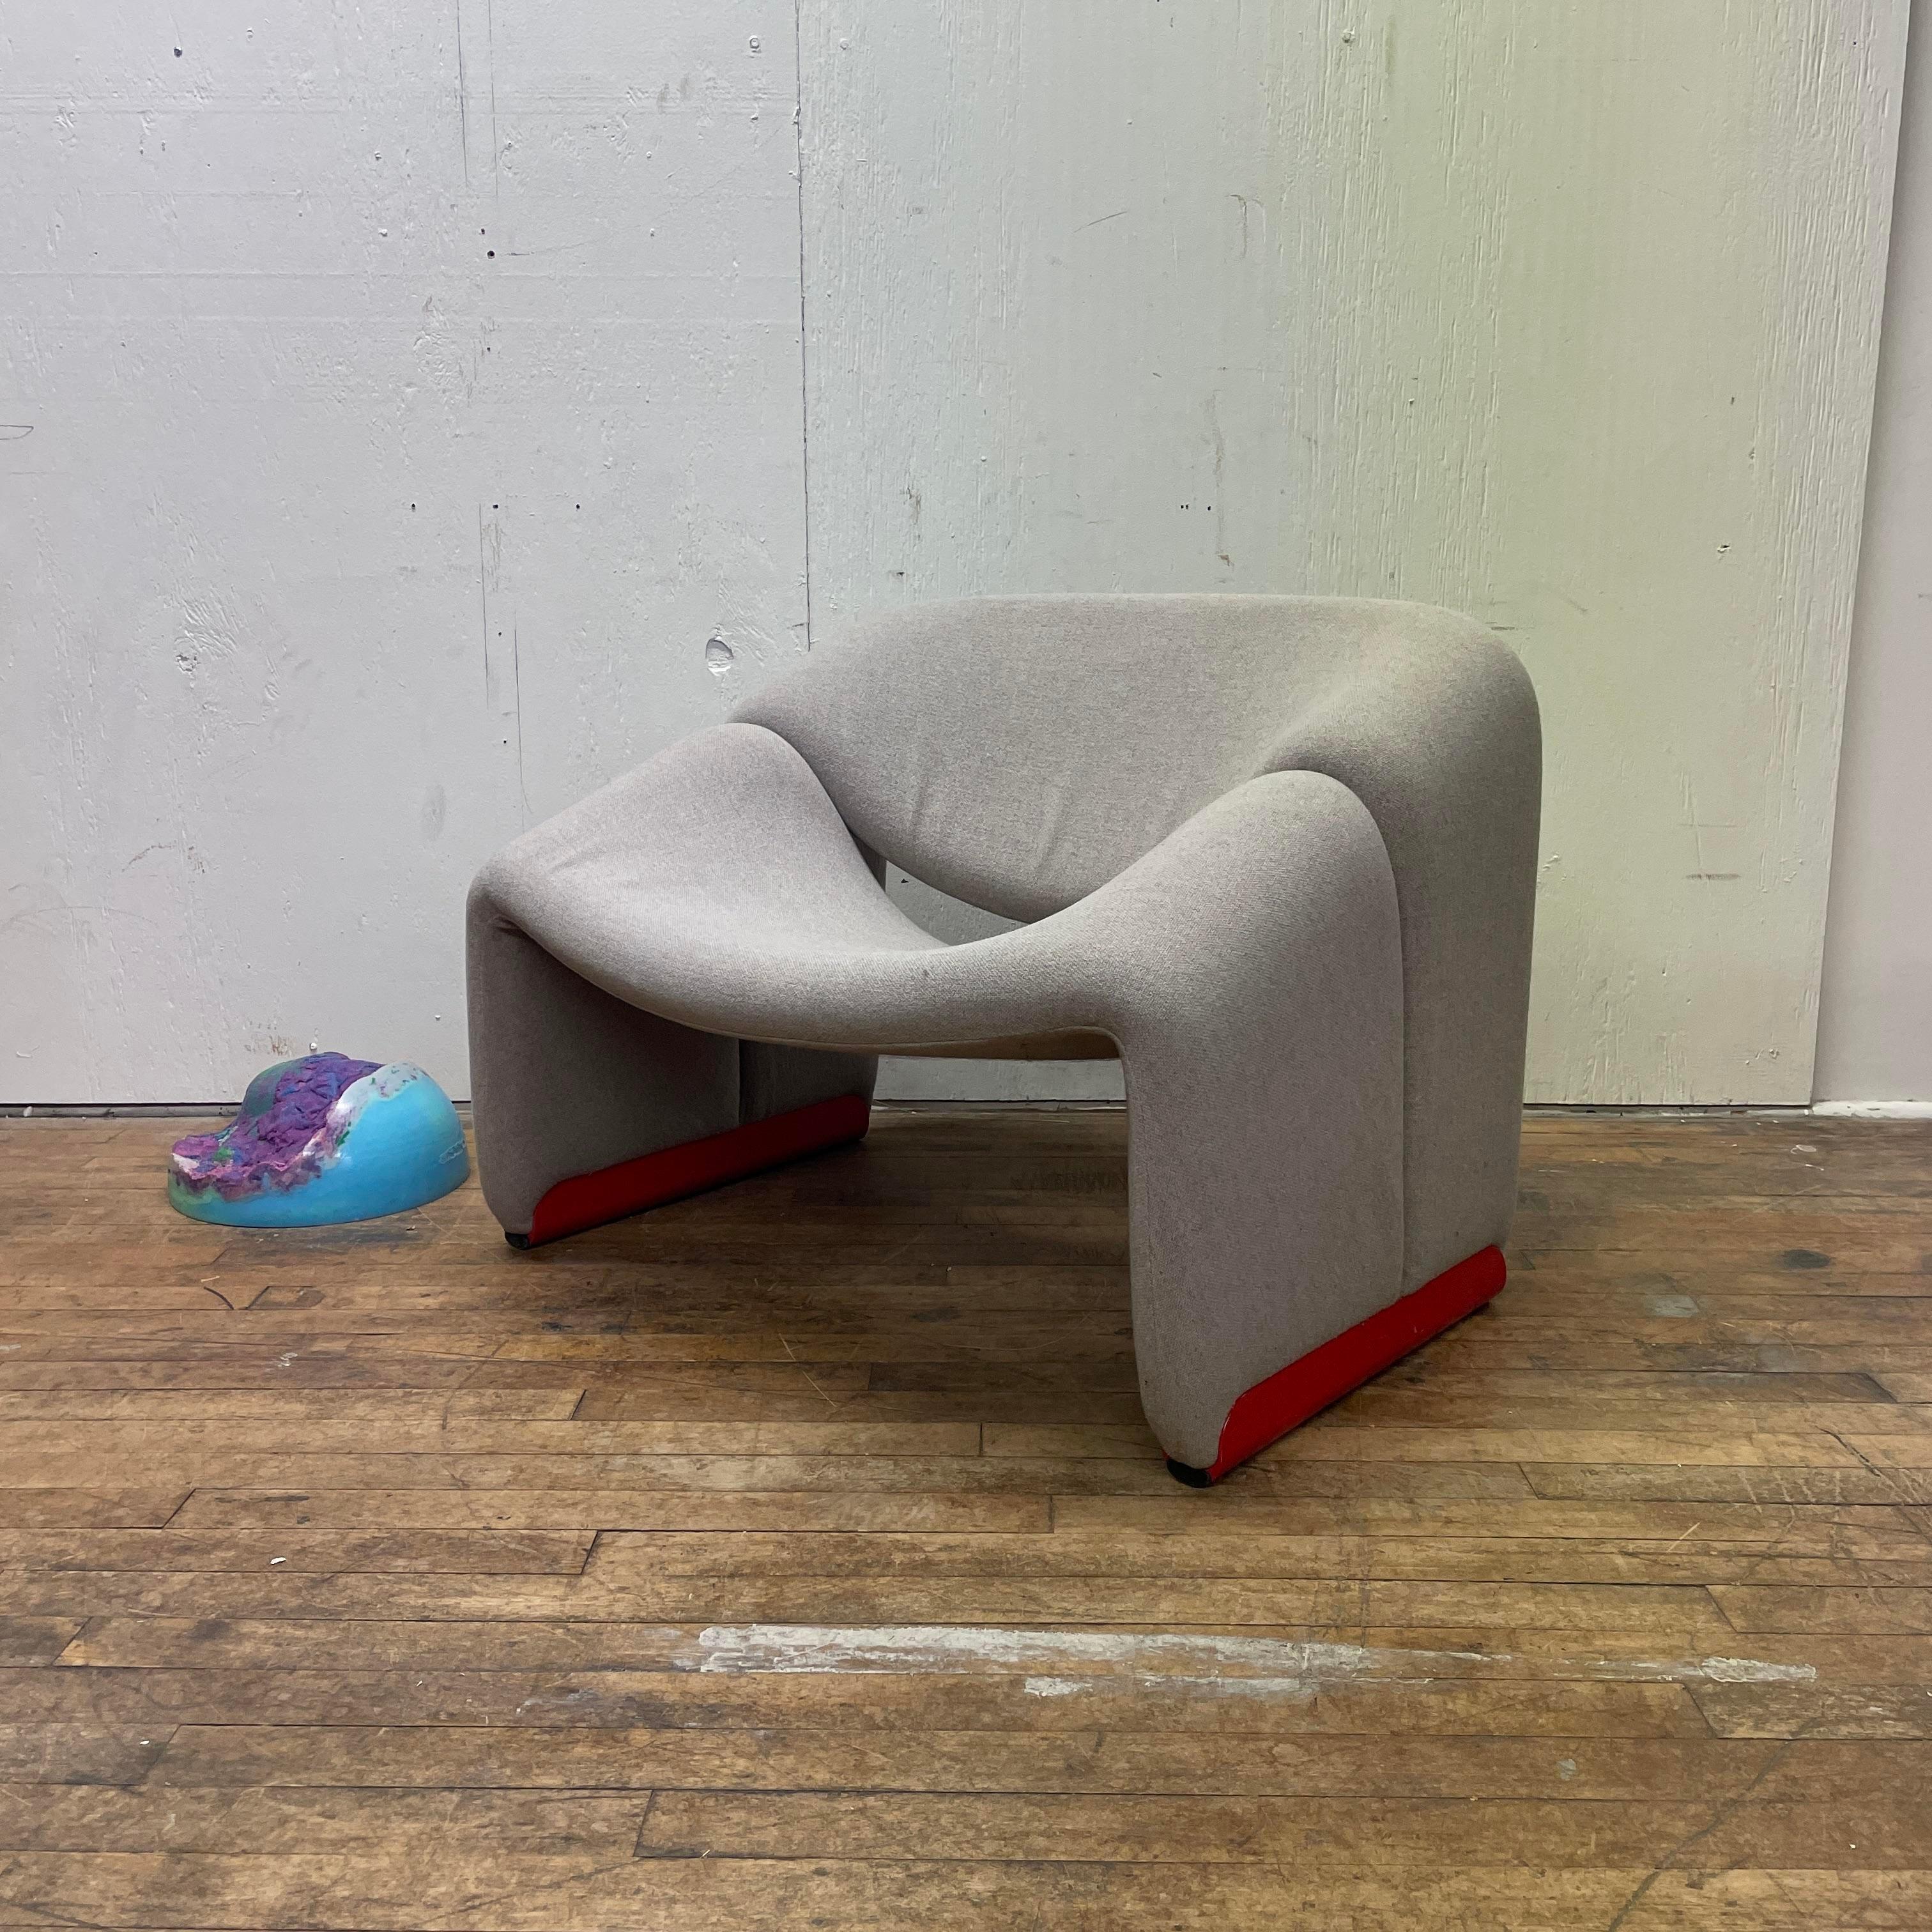 An original vintage Groovy chair designed by Pierre Paulin for Artifort. This piece has its original grey fabric and a vibrant red metal base. It comes from an estate full of Artifort furniture, much of which is available in our shop.

This chair